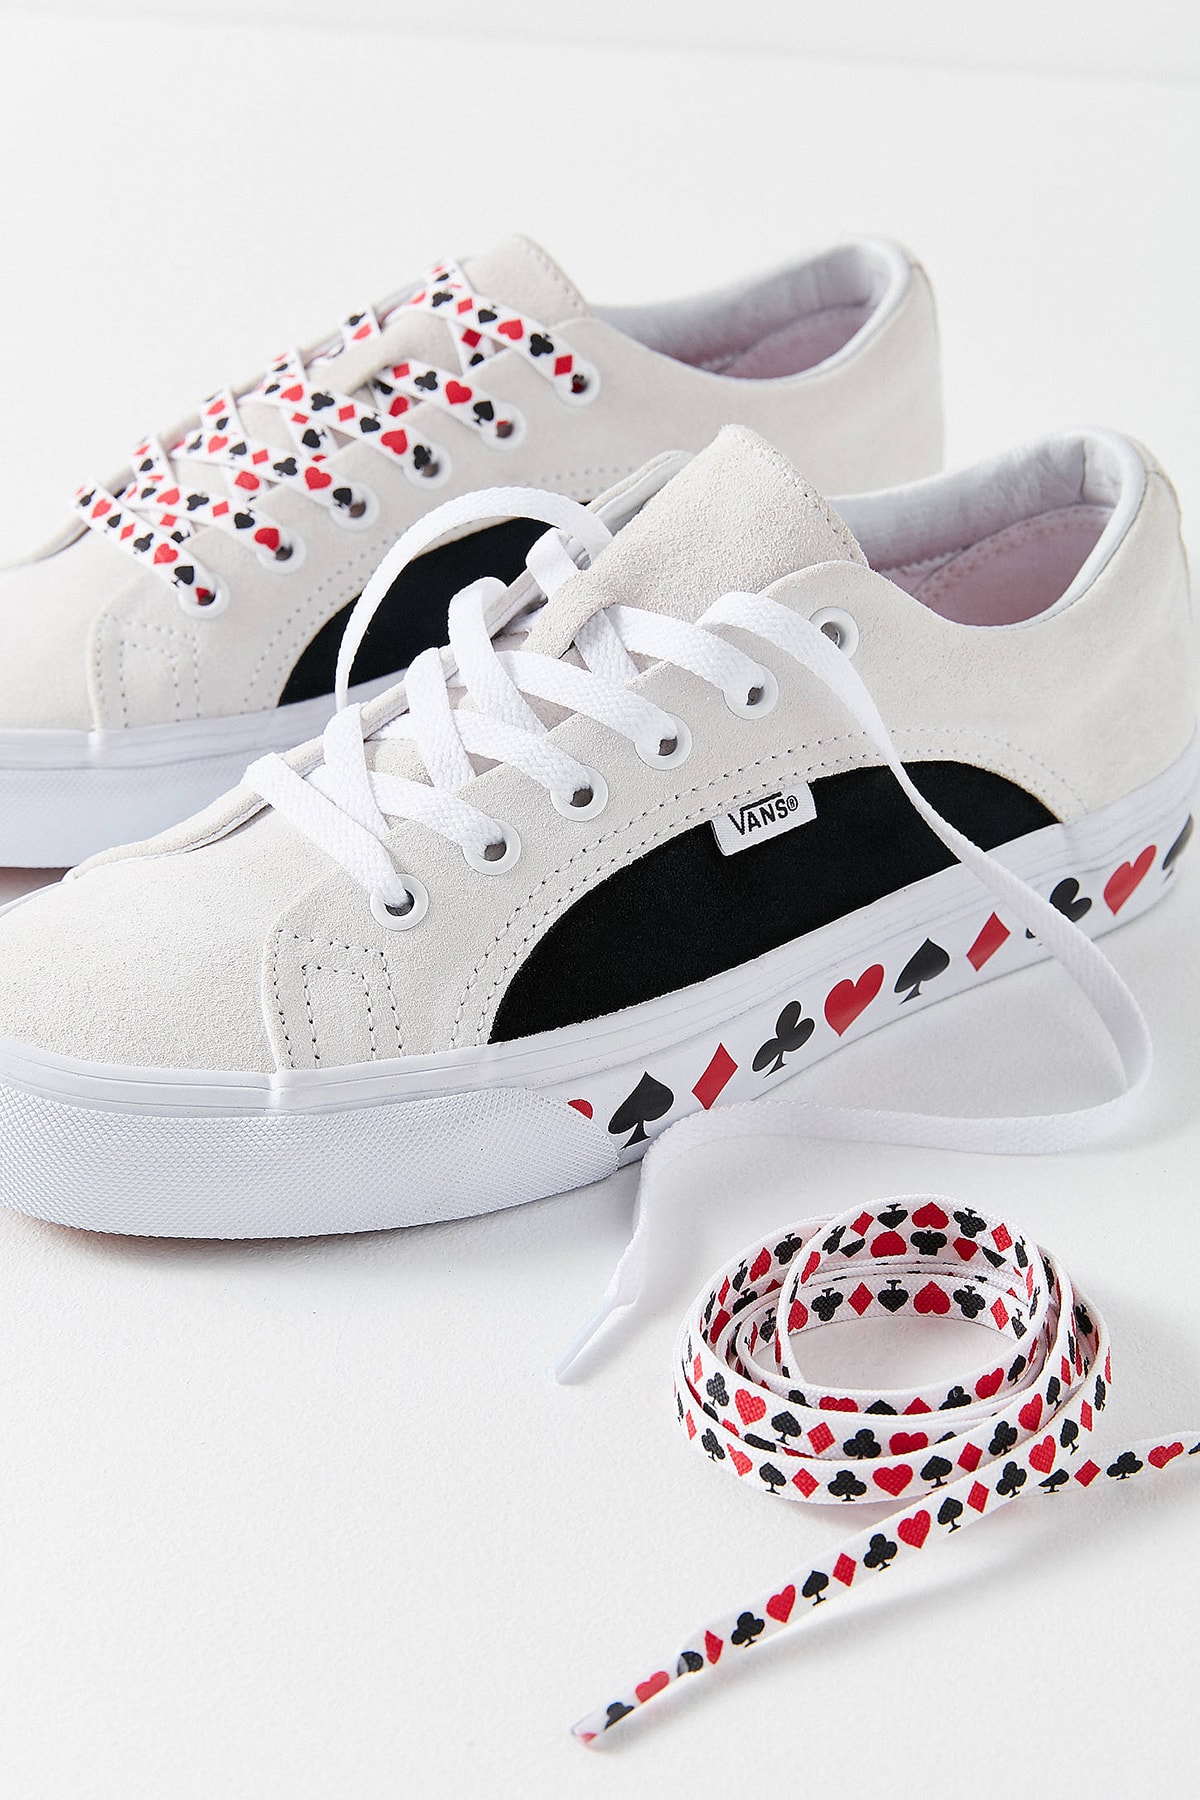 Vans Urban Outfitters Lampin Skin Sneakers Playing Cards Heart Red White Black